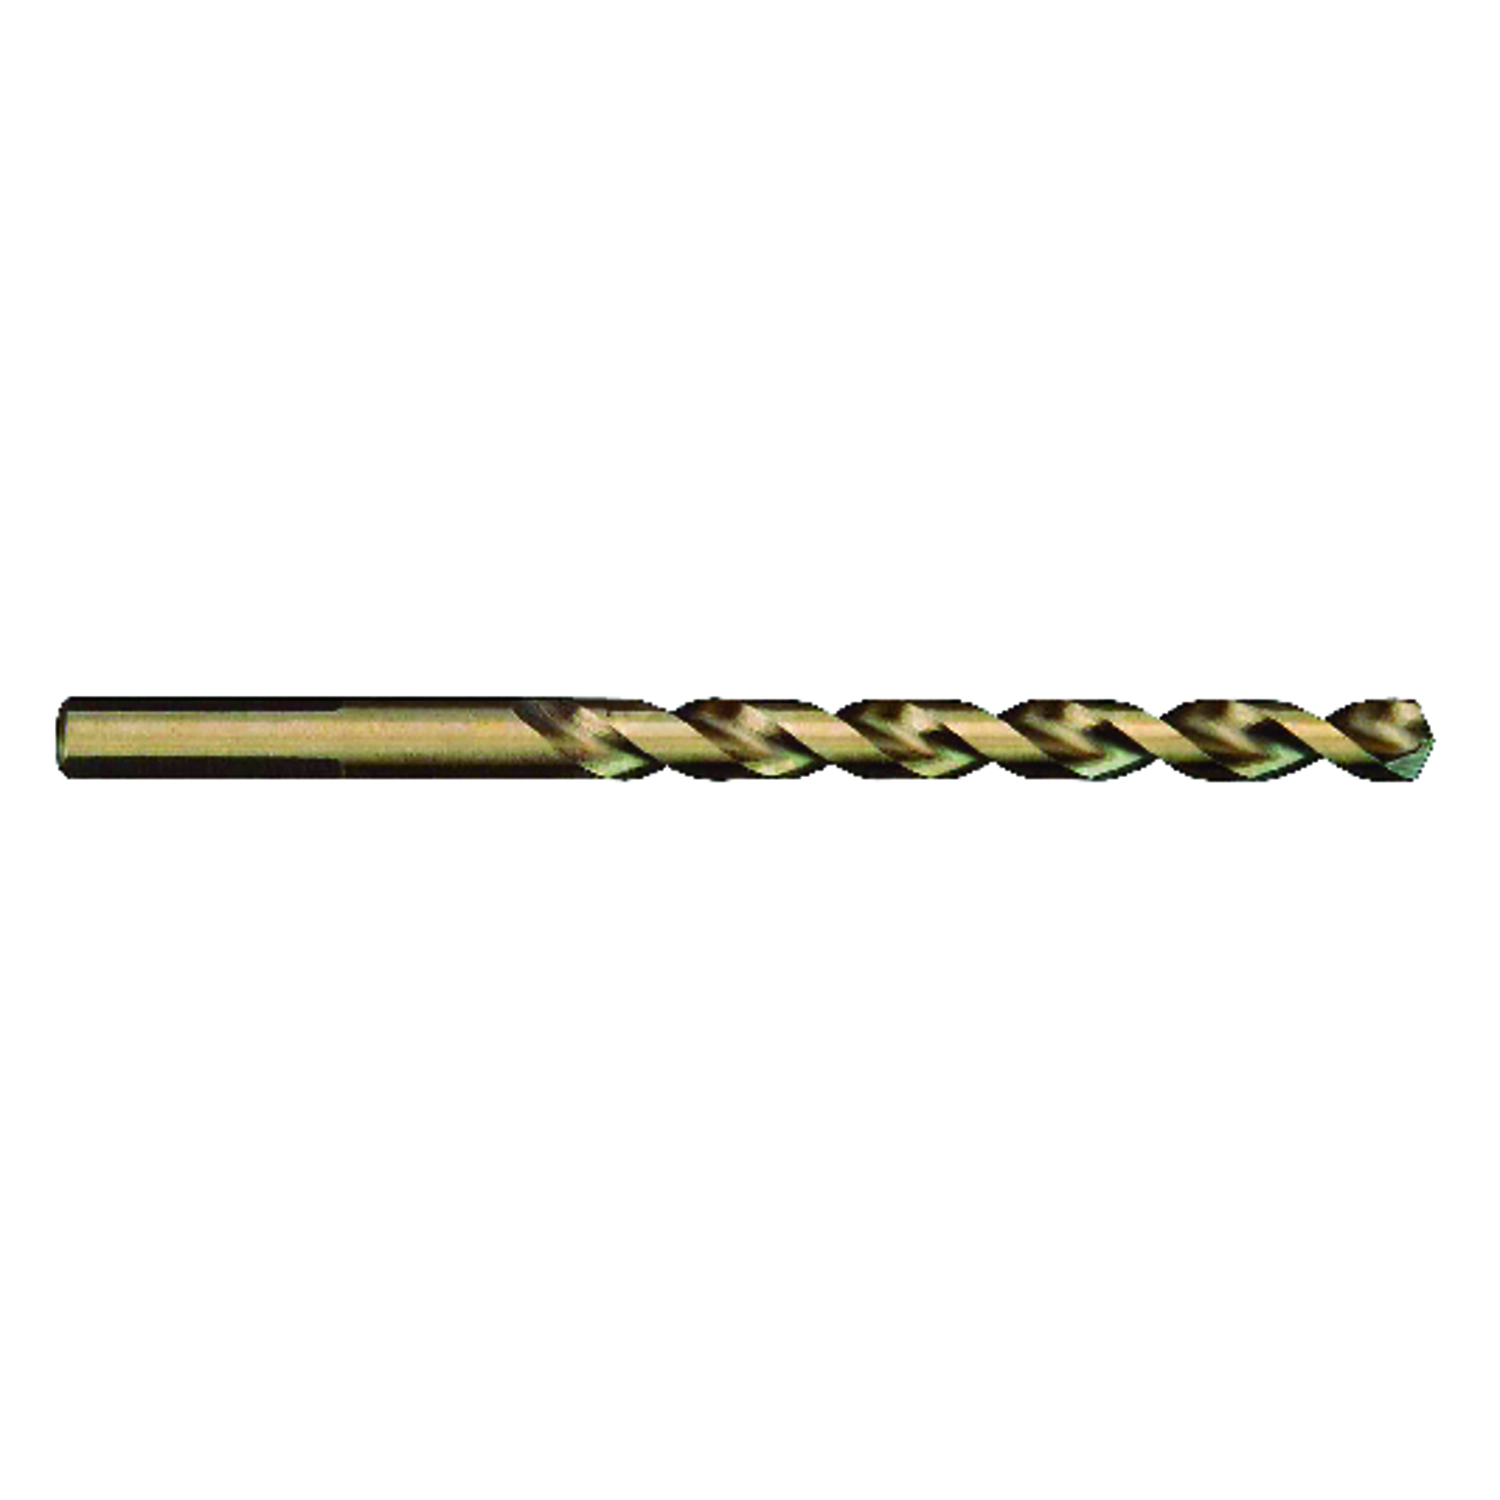 Milwaukee Red Helix 9/64 in. X 2-7/8 in. L Steel Thunderbolt Drill Bit 1 pc